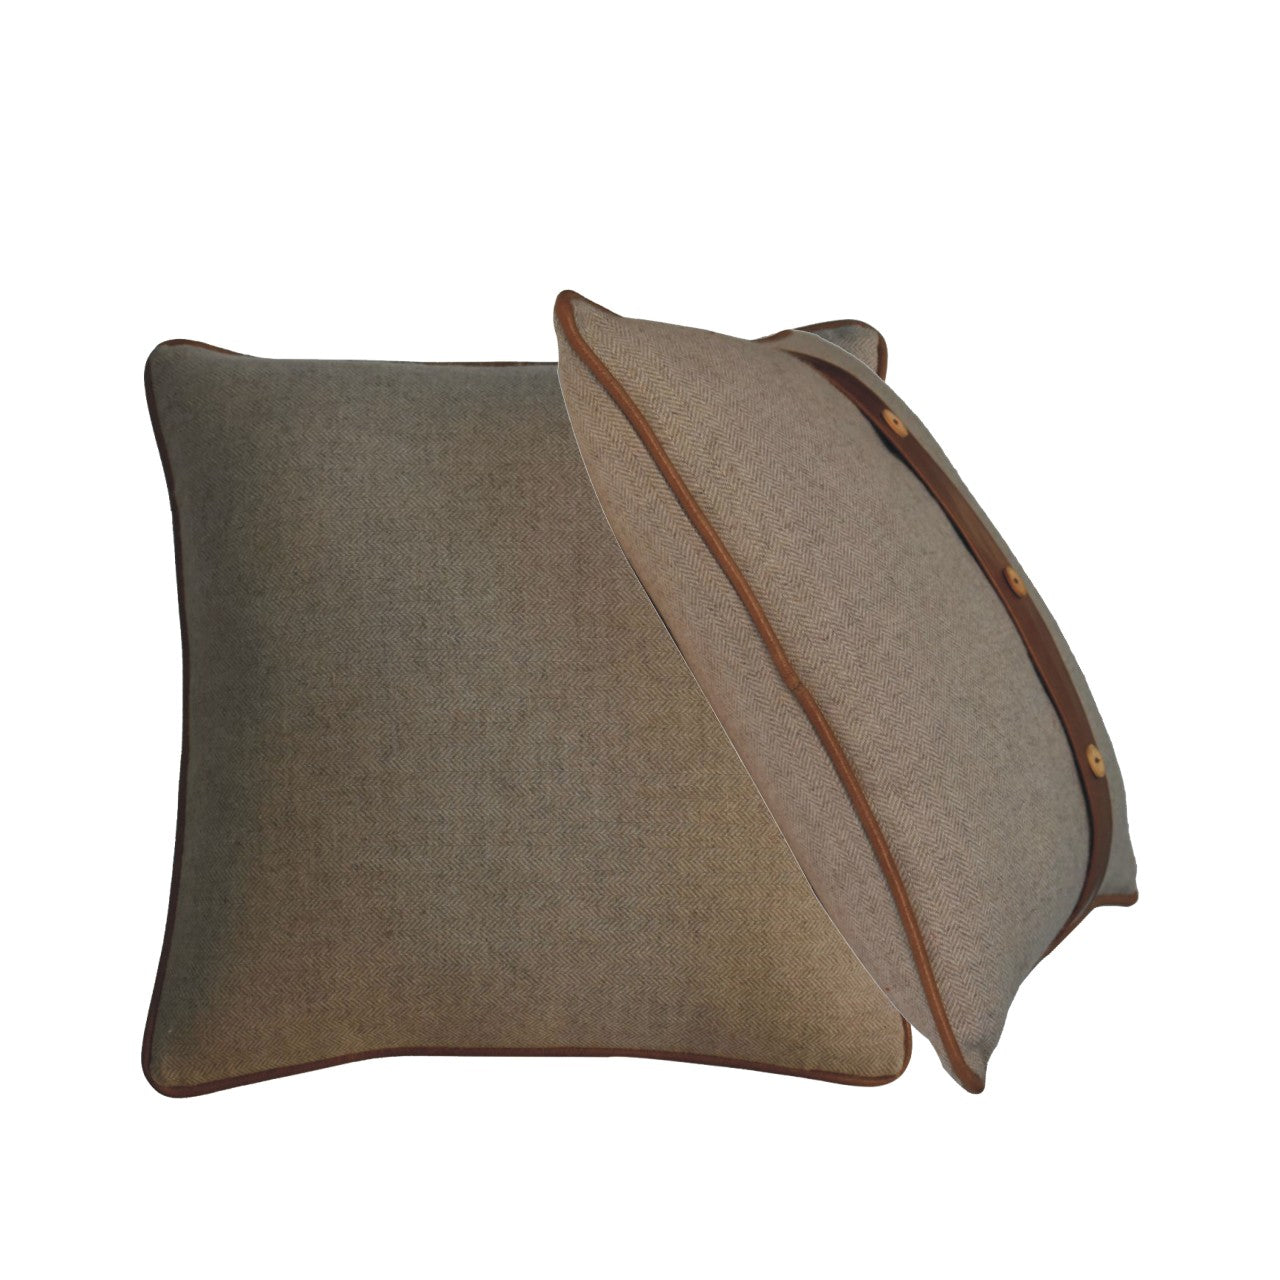 View Quin Leather Sand Cushion Set of 2 information